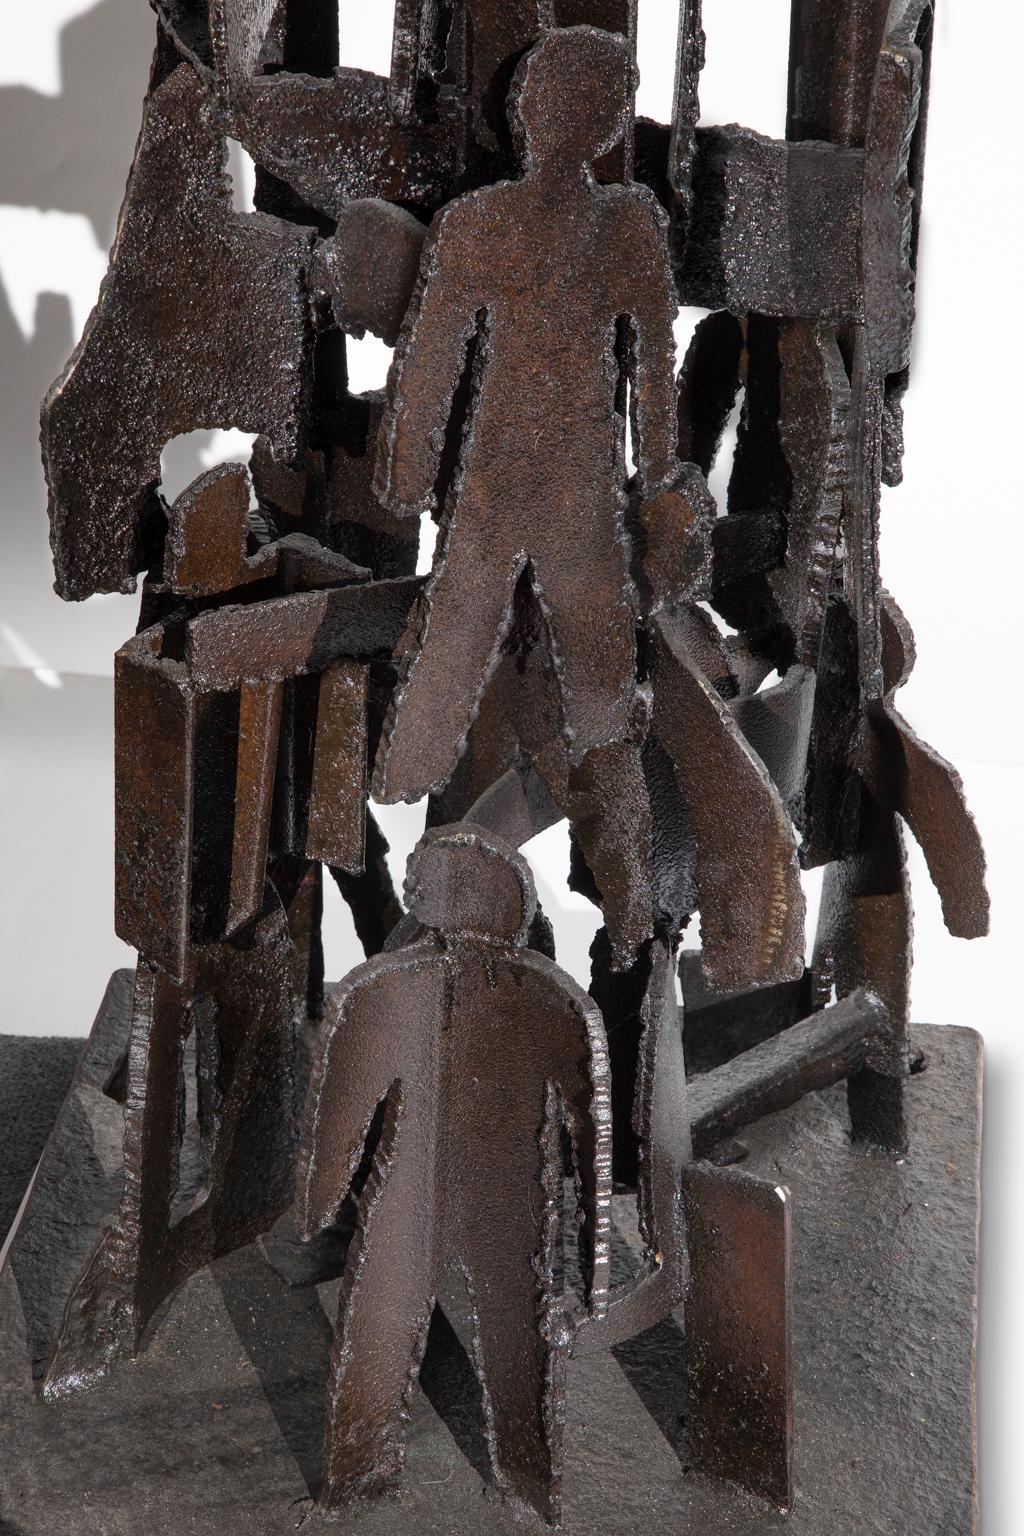 UNTITLED, Abstract/Figurative, Black Welded Steel, Cass Corridor Artist, Detroit For Sale 4